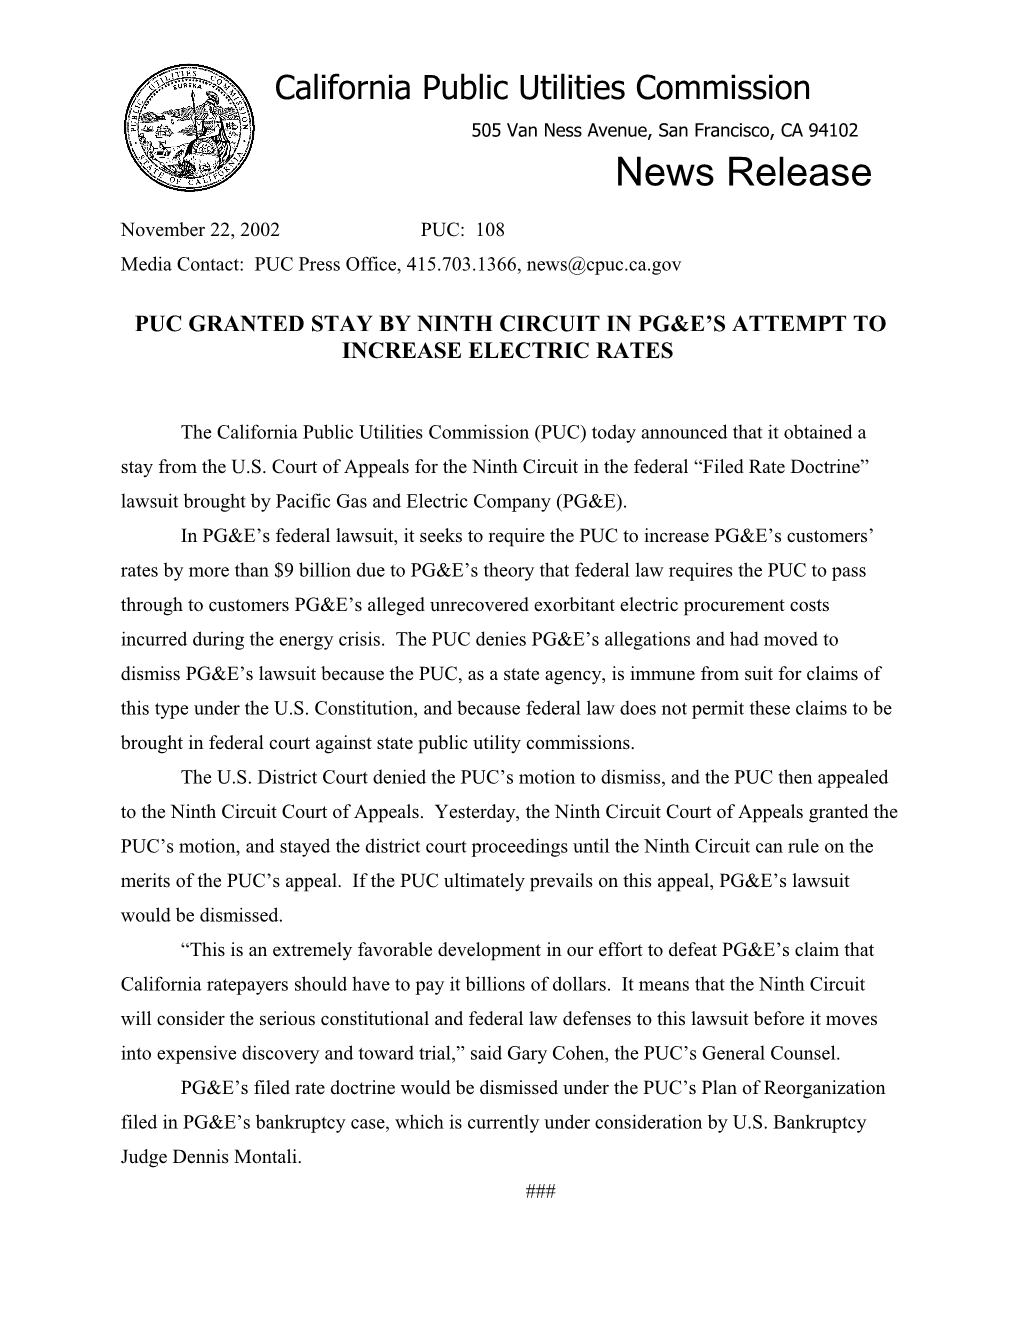 Puc Granted Stay by Ninth Circuit in PG&E S Attempt to Increase Electric Rates